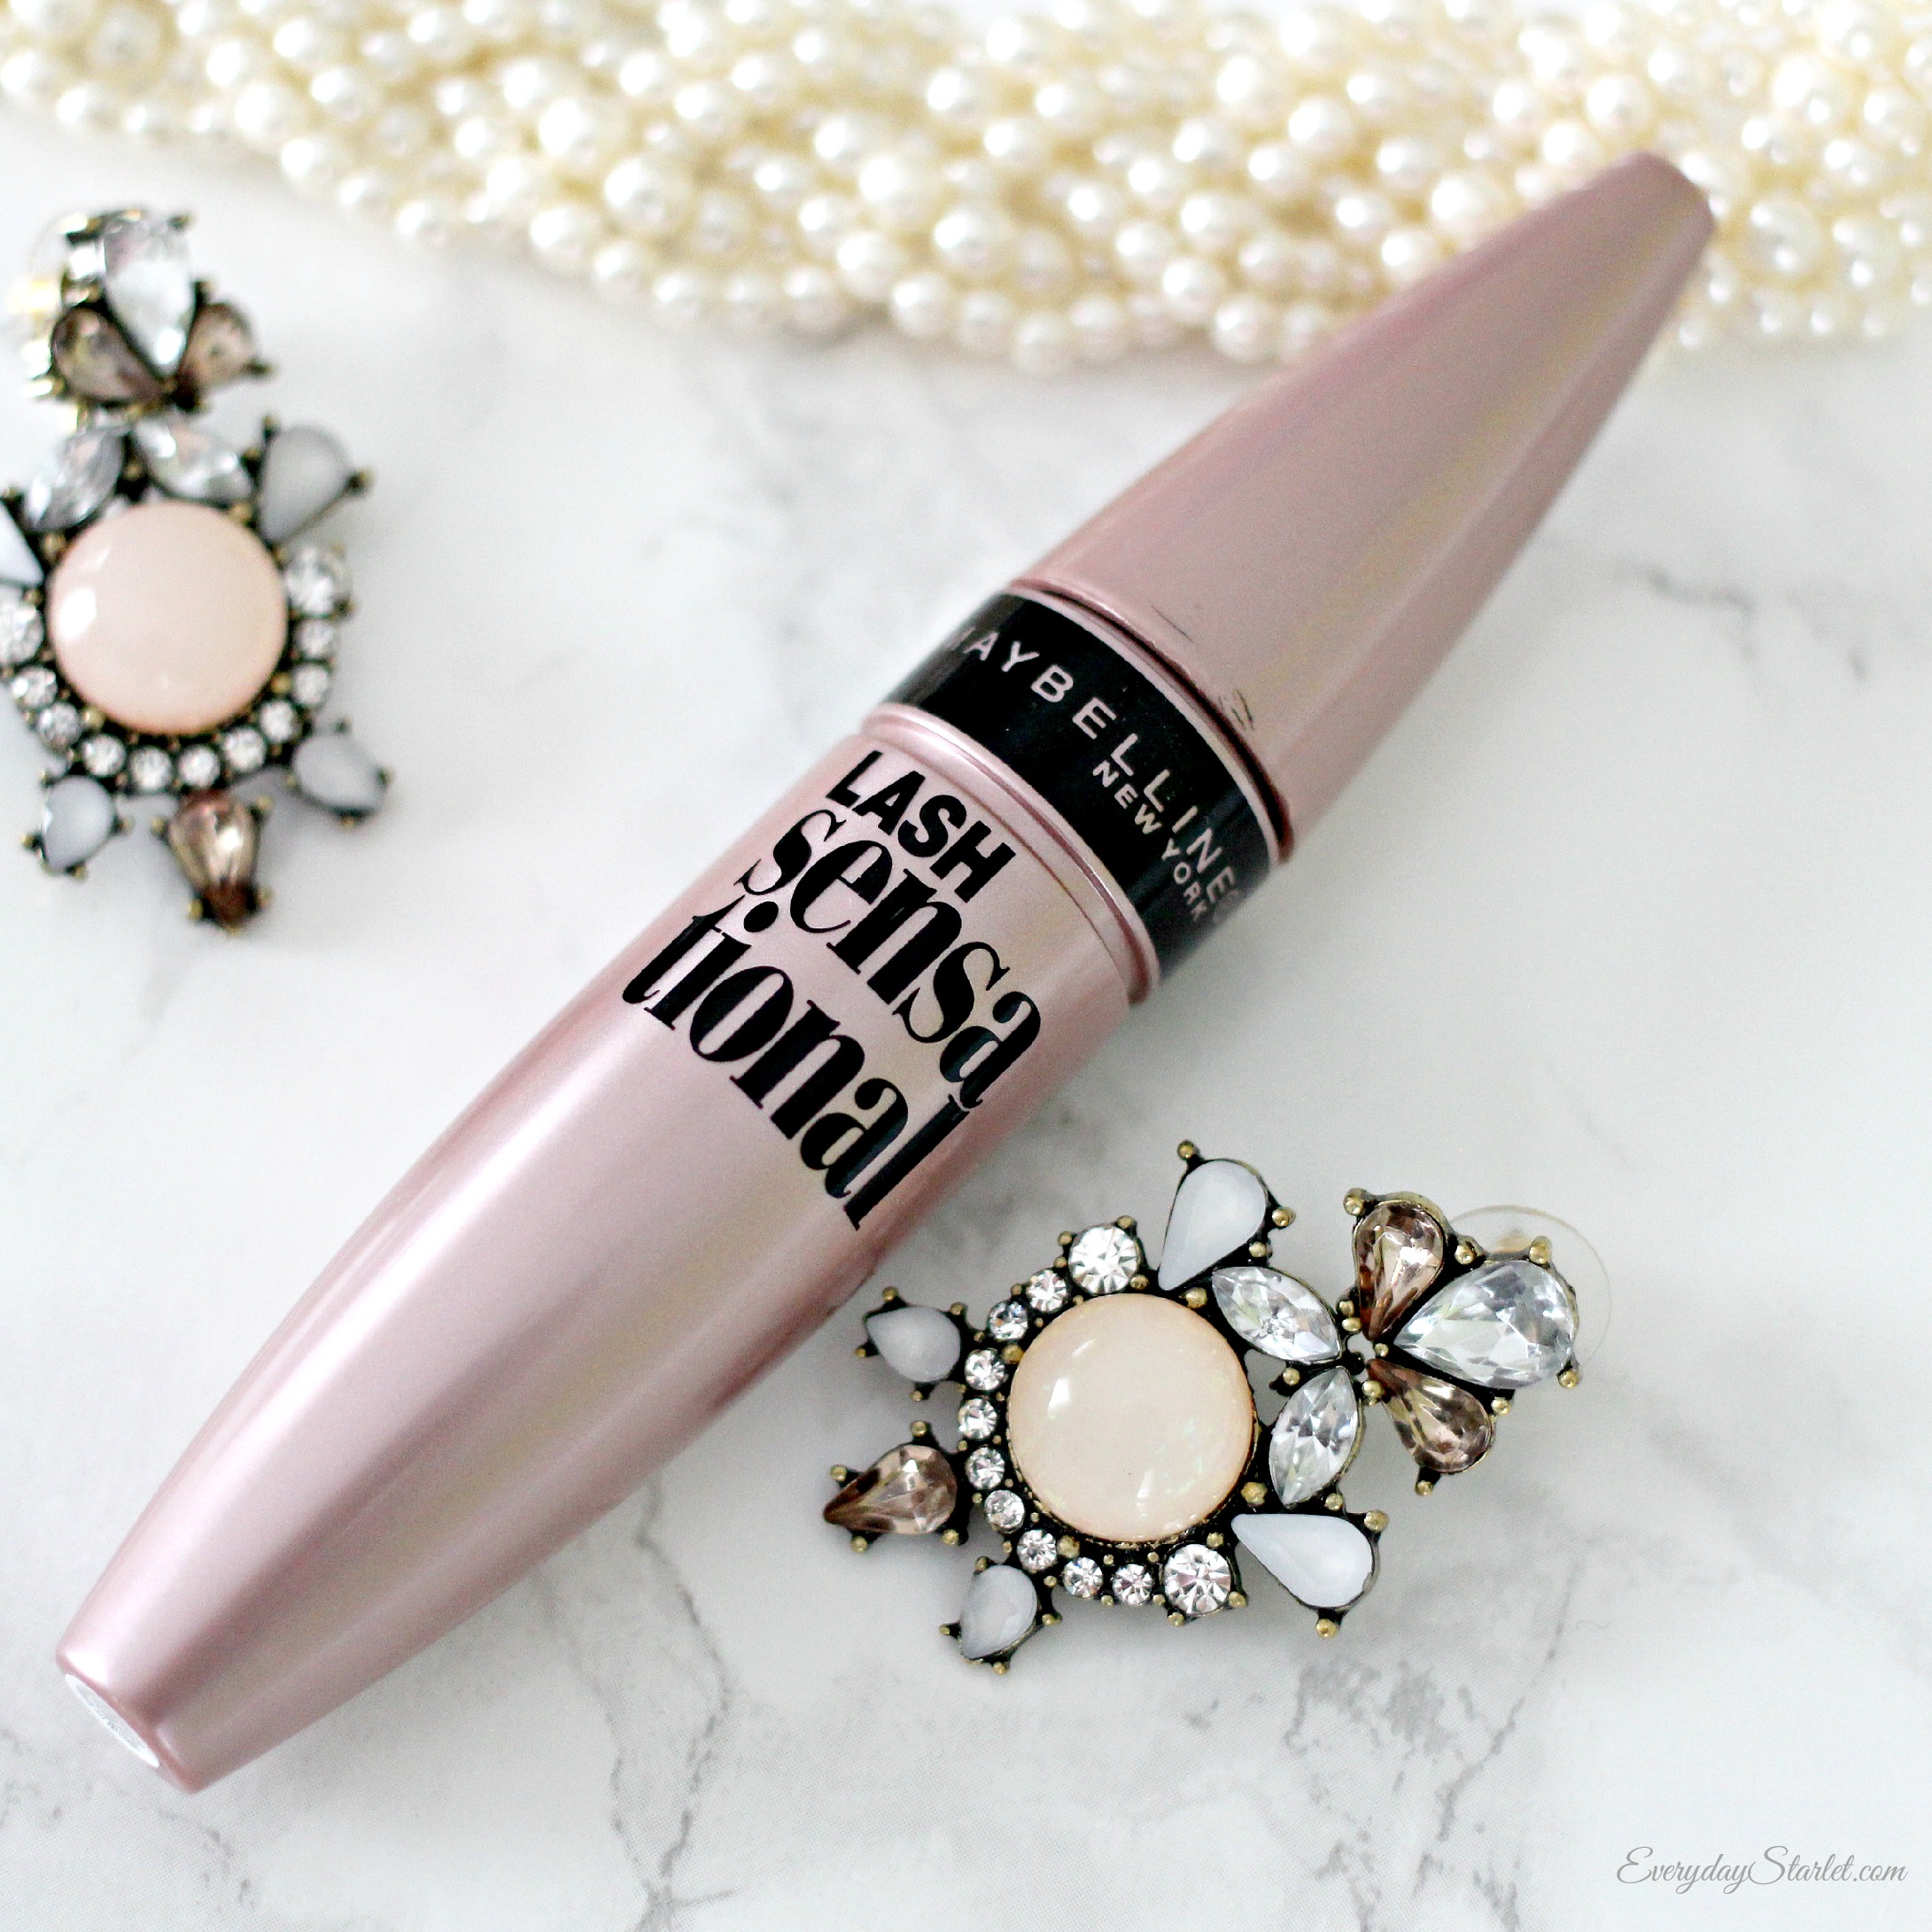 The Best Maybelline Mascara